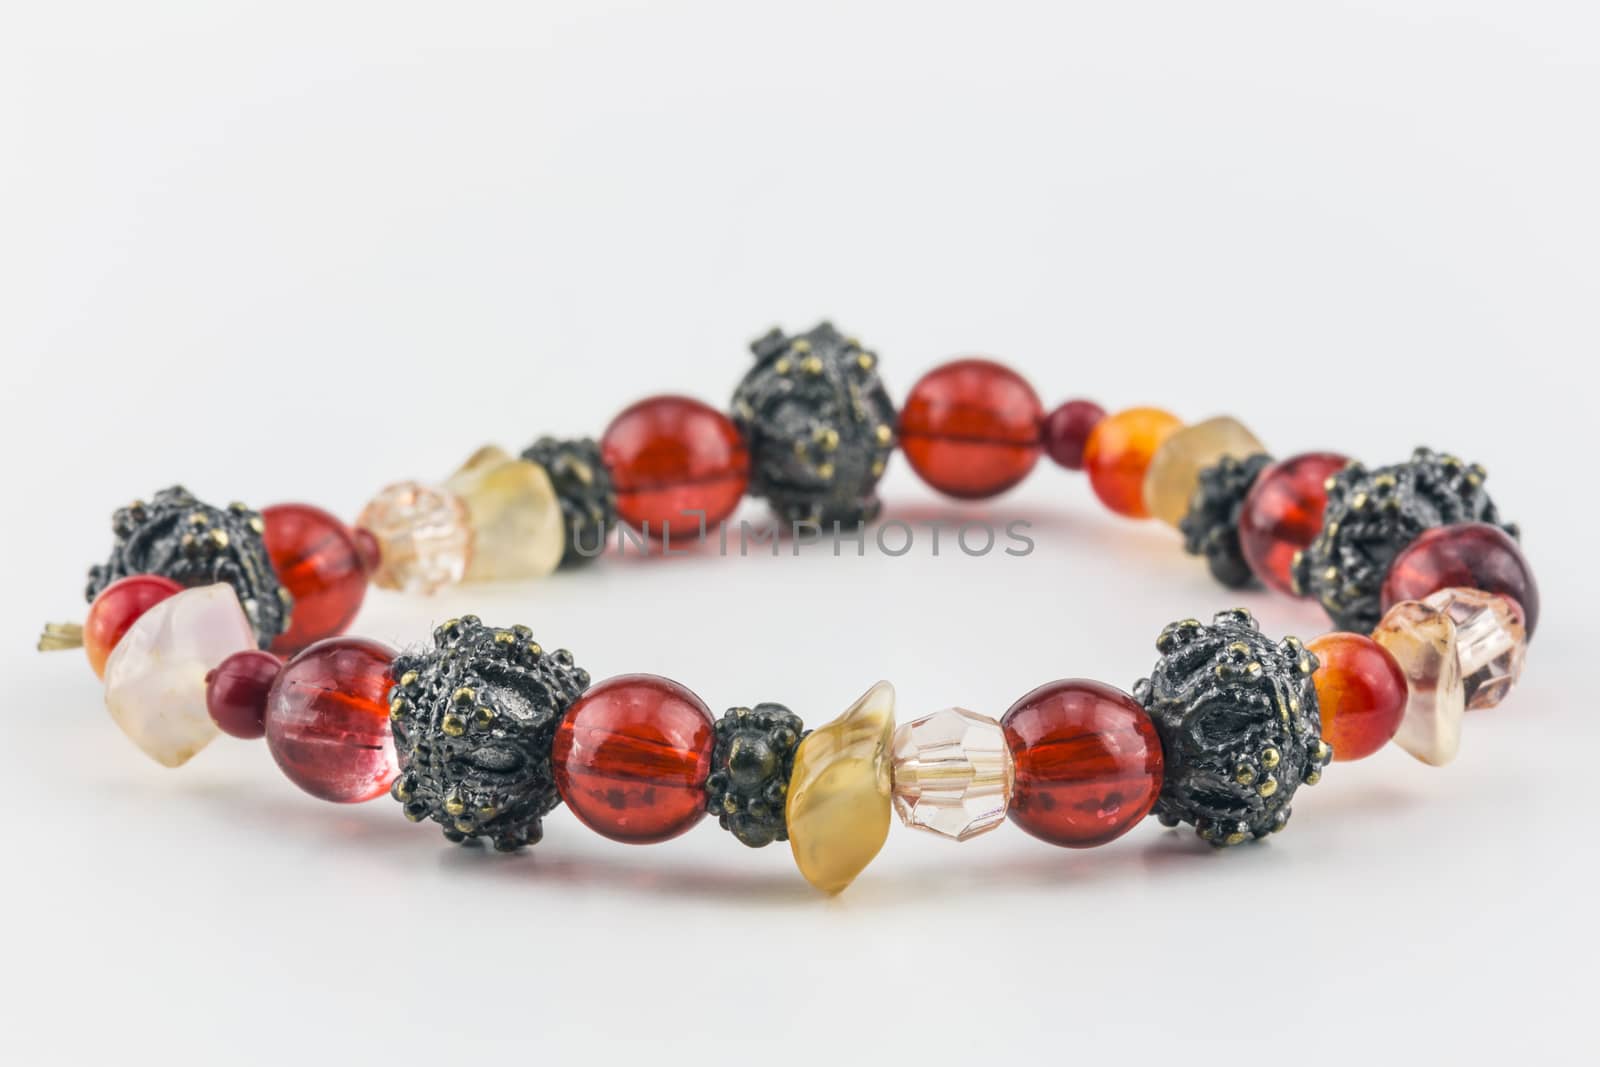 Bracelet of red, orange, metallic, and clear beads.